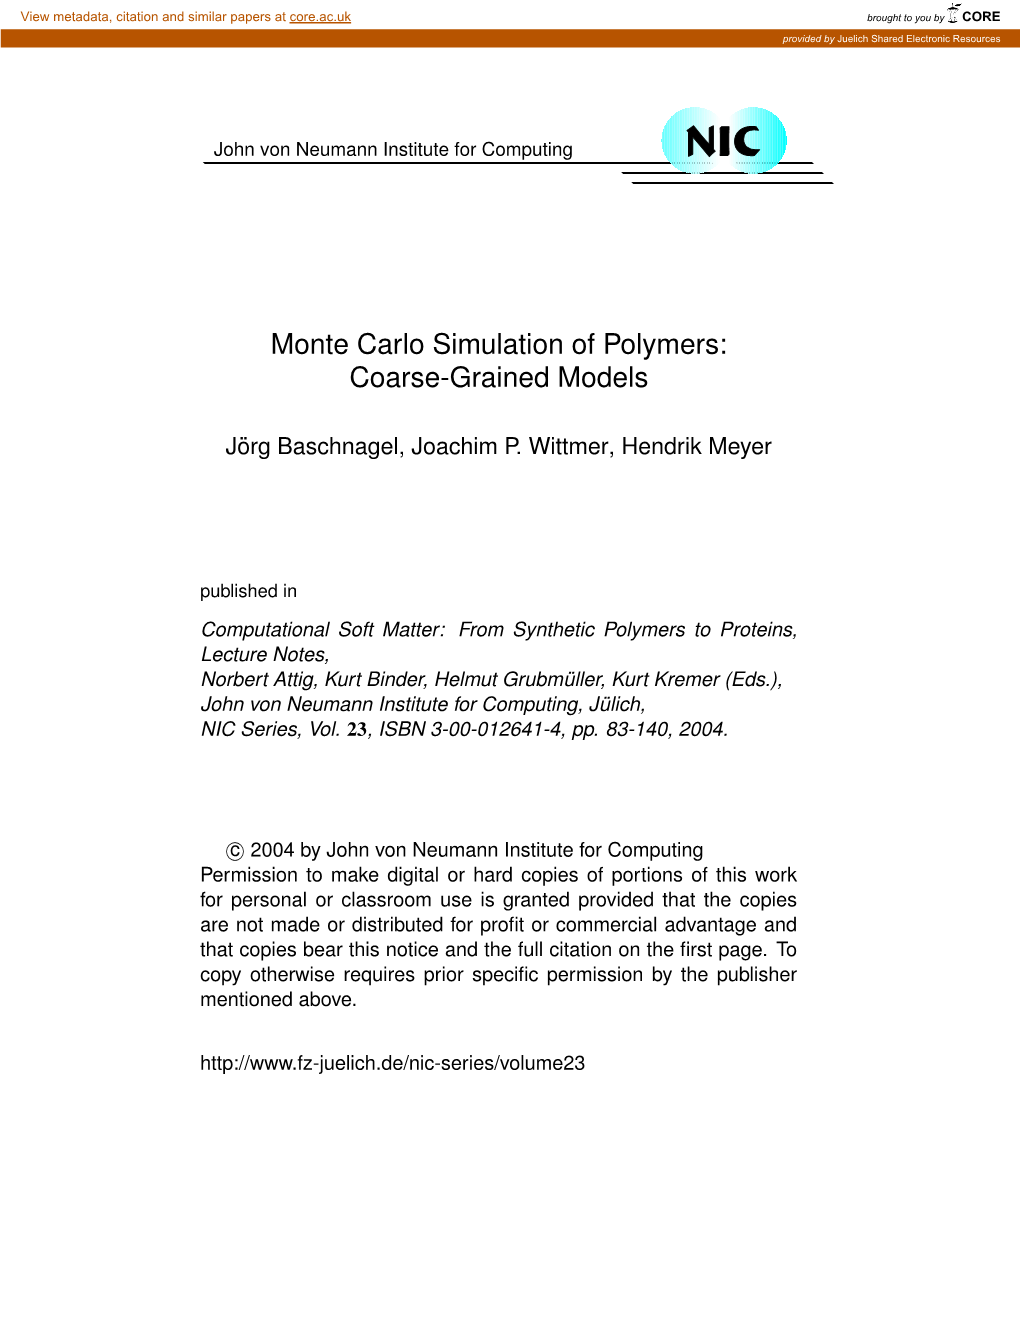 Monte Carlo Simulation of Polymers: Coarse-Grained Models